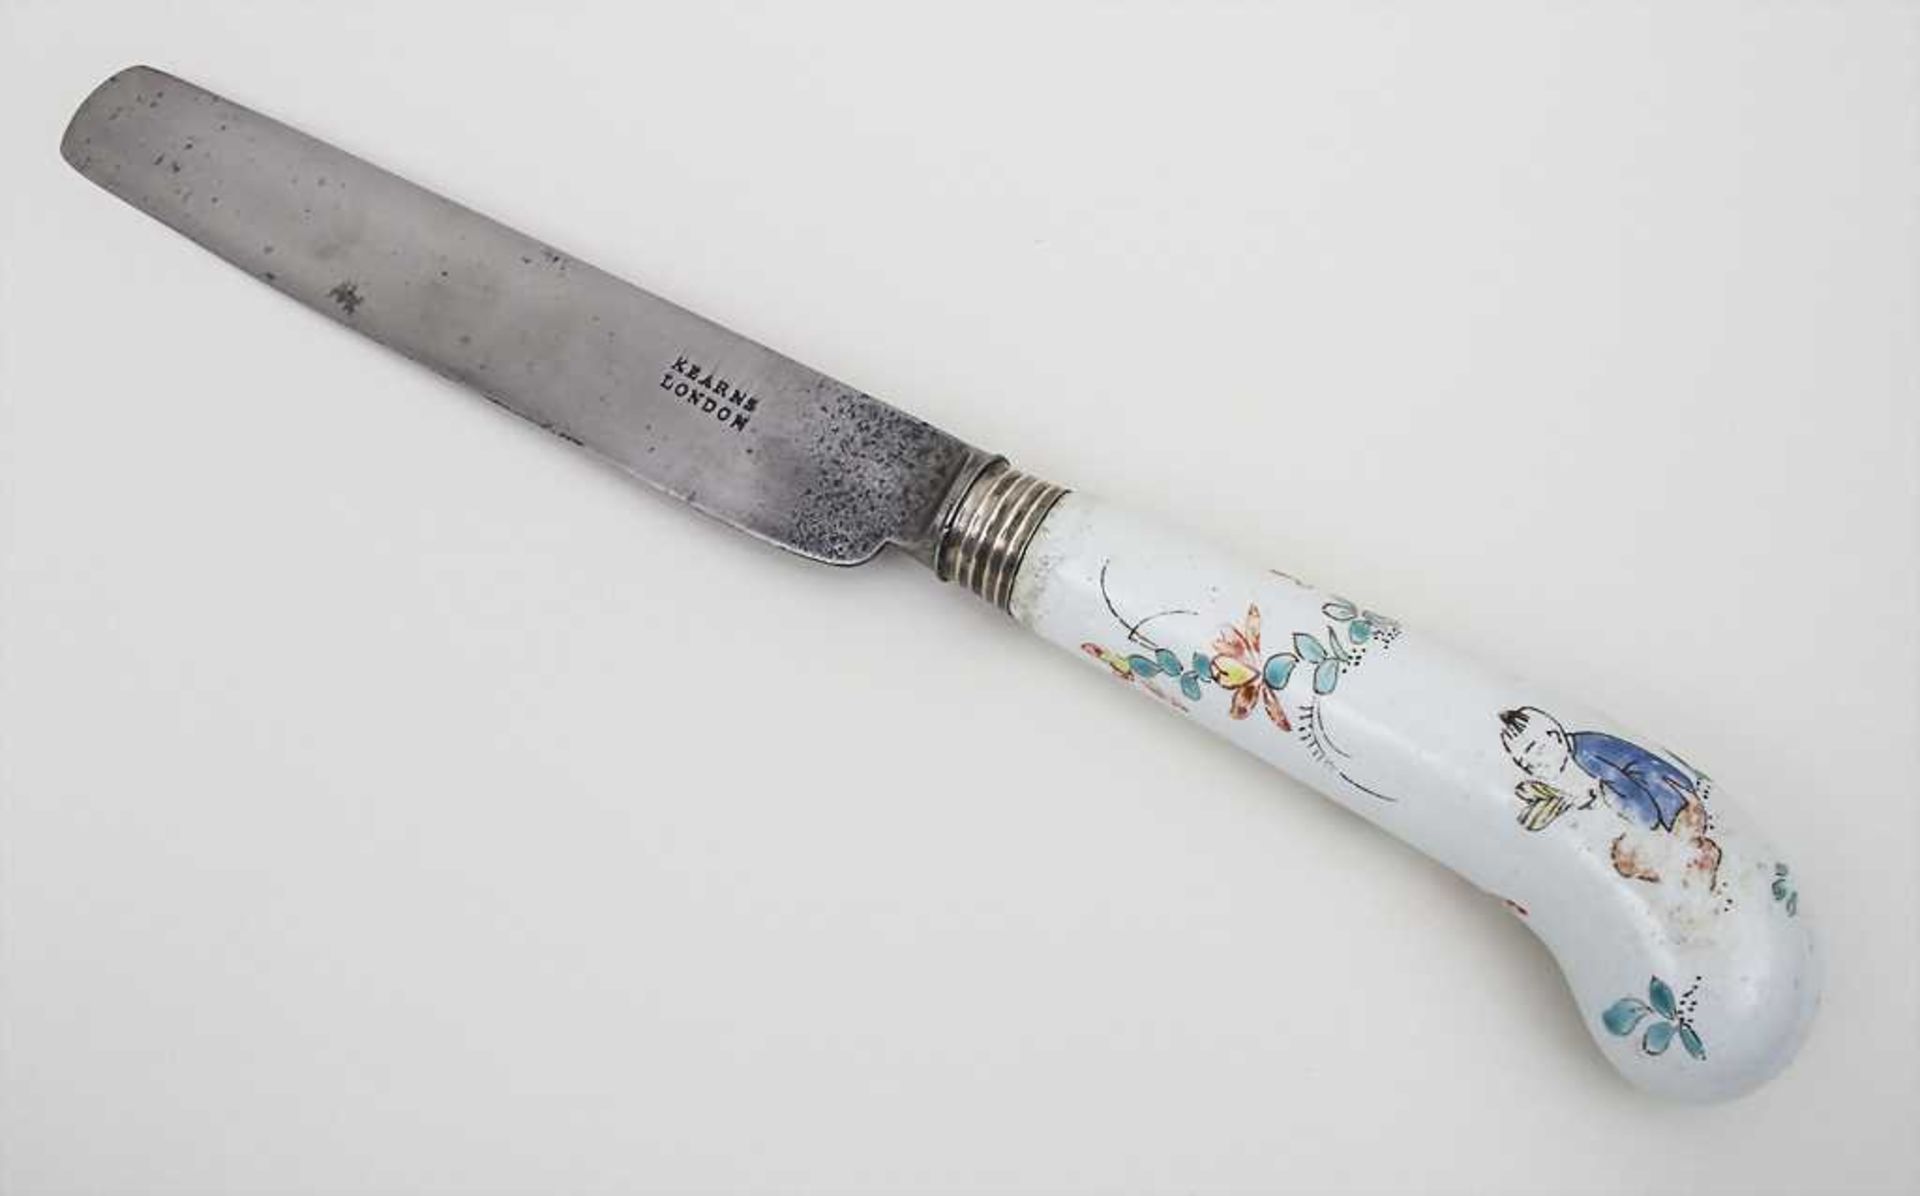 Messer mit Chinoiserie / Knife With Chinese Decor, wohl Meissen, 18. Jh. Material: kolbenförmige